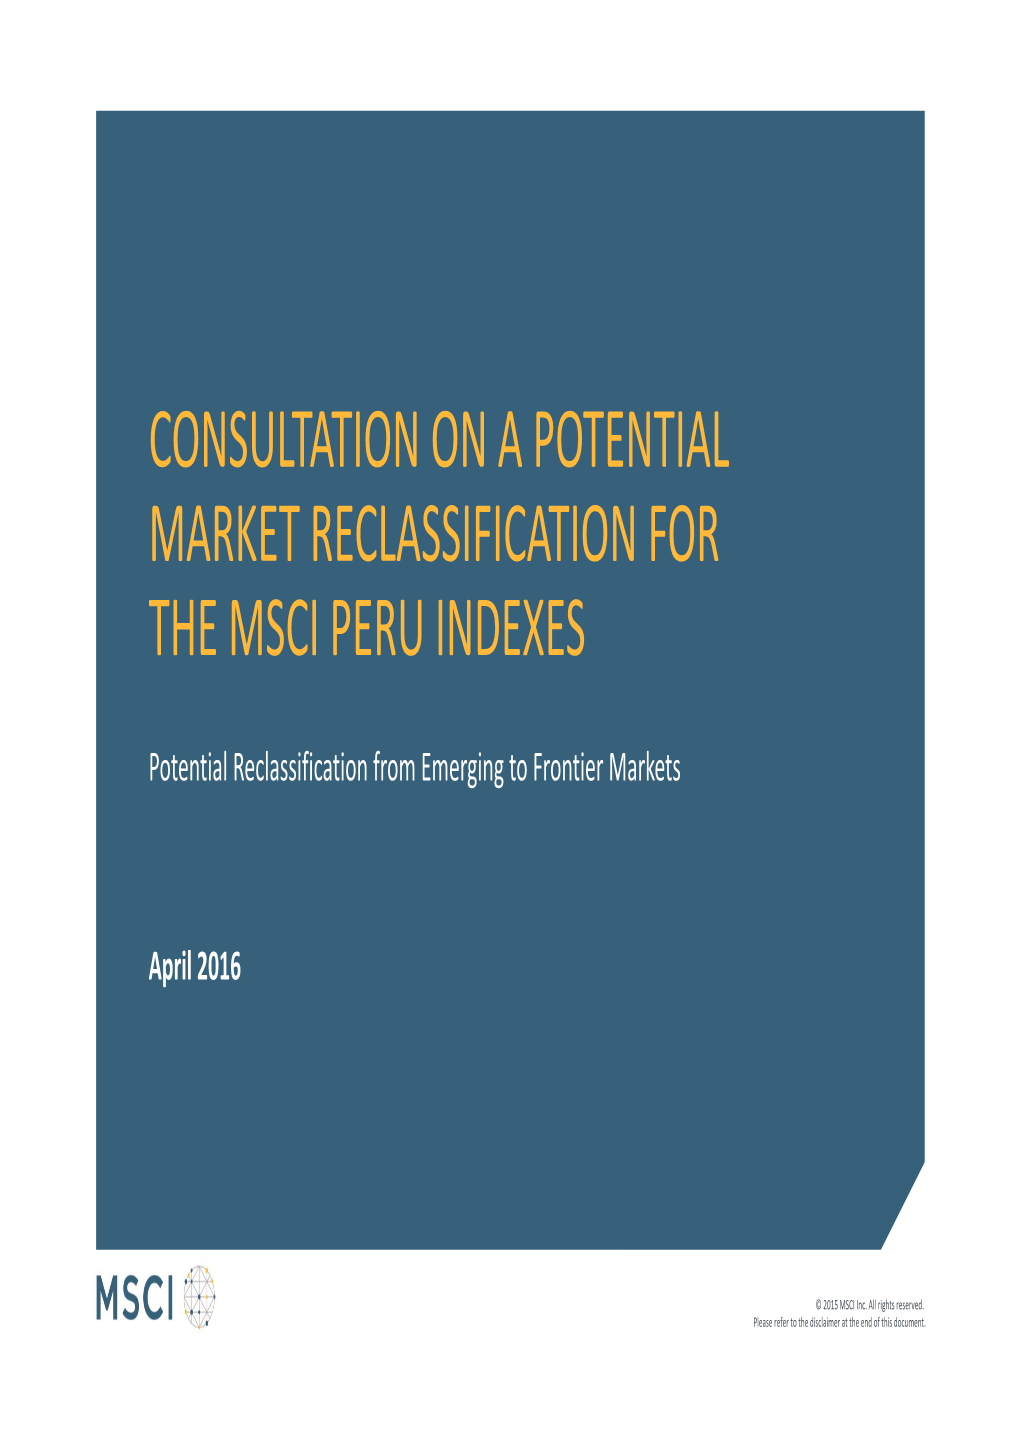 Consultation on a Potential Market Reclassification for the Msci Peru Indexes